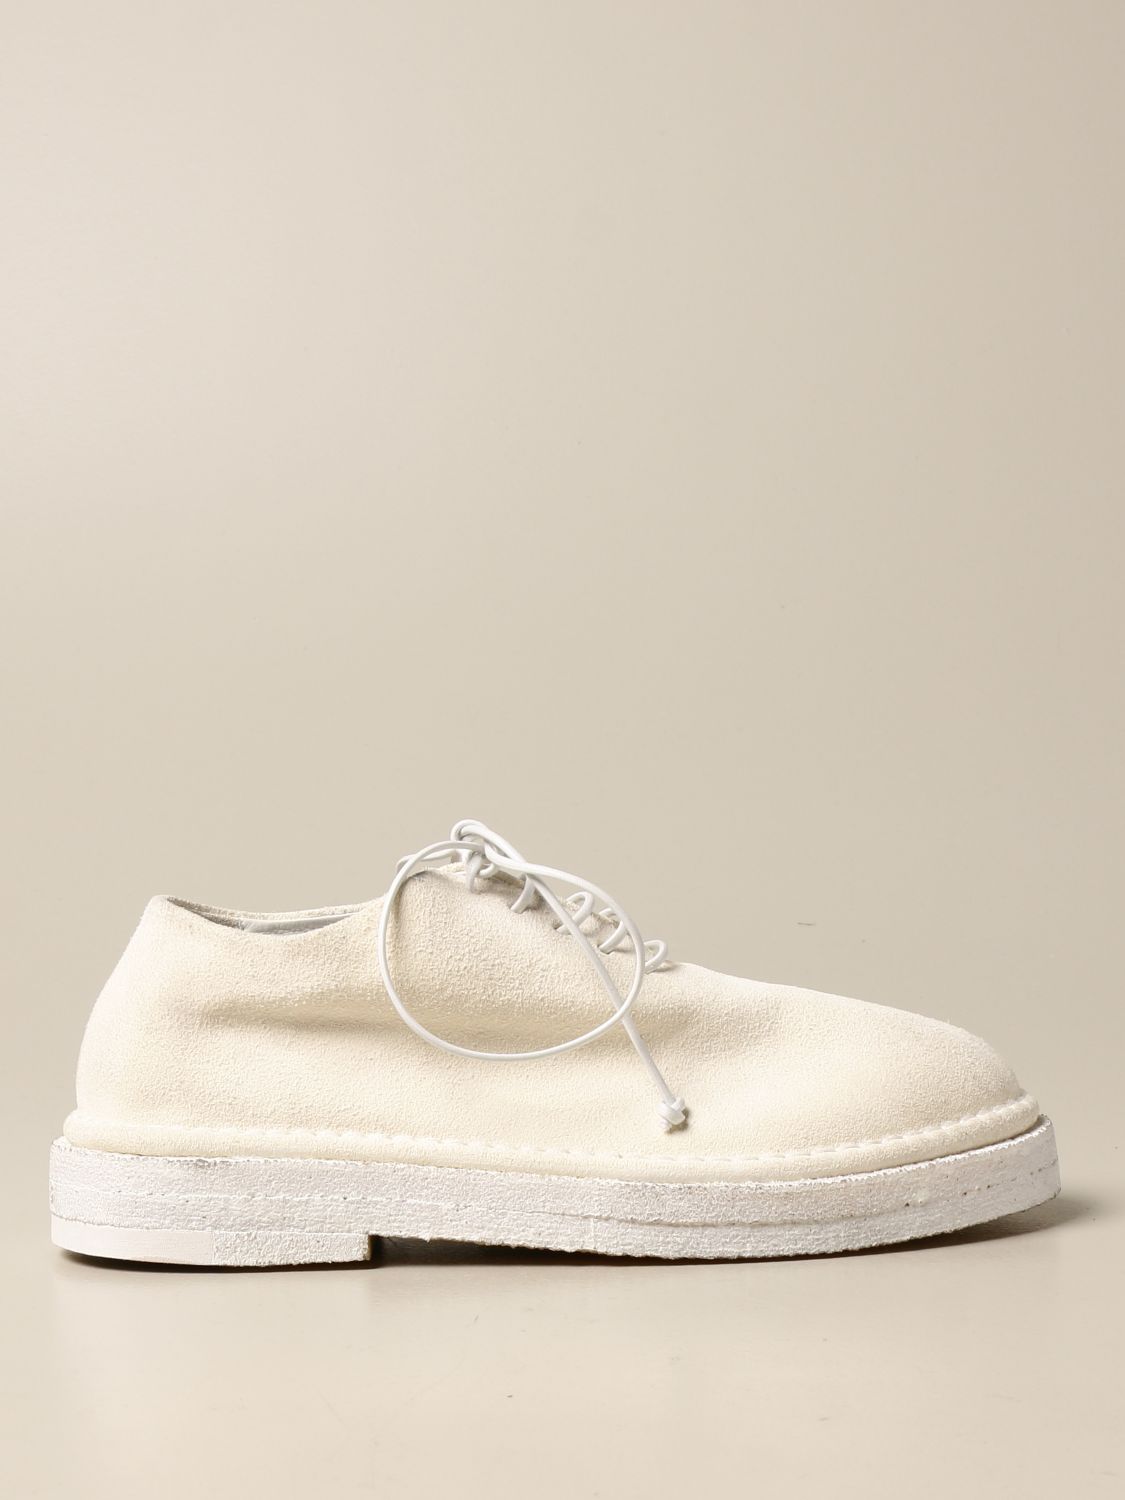 Buy > marsell shoes on sale > in stock